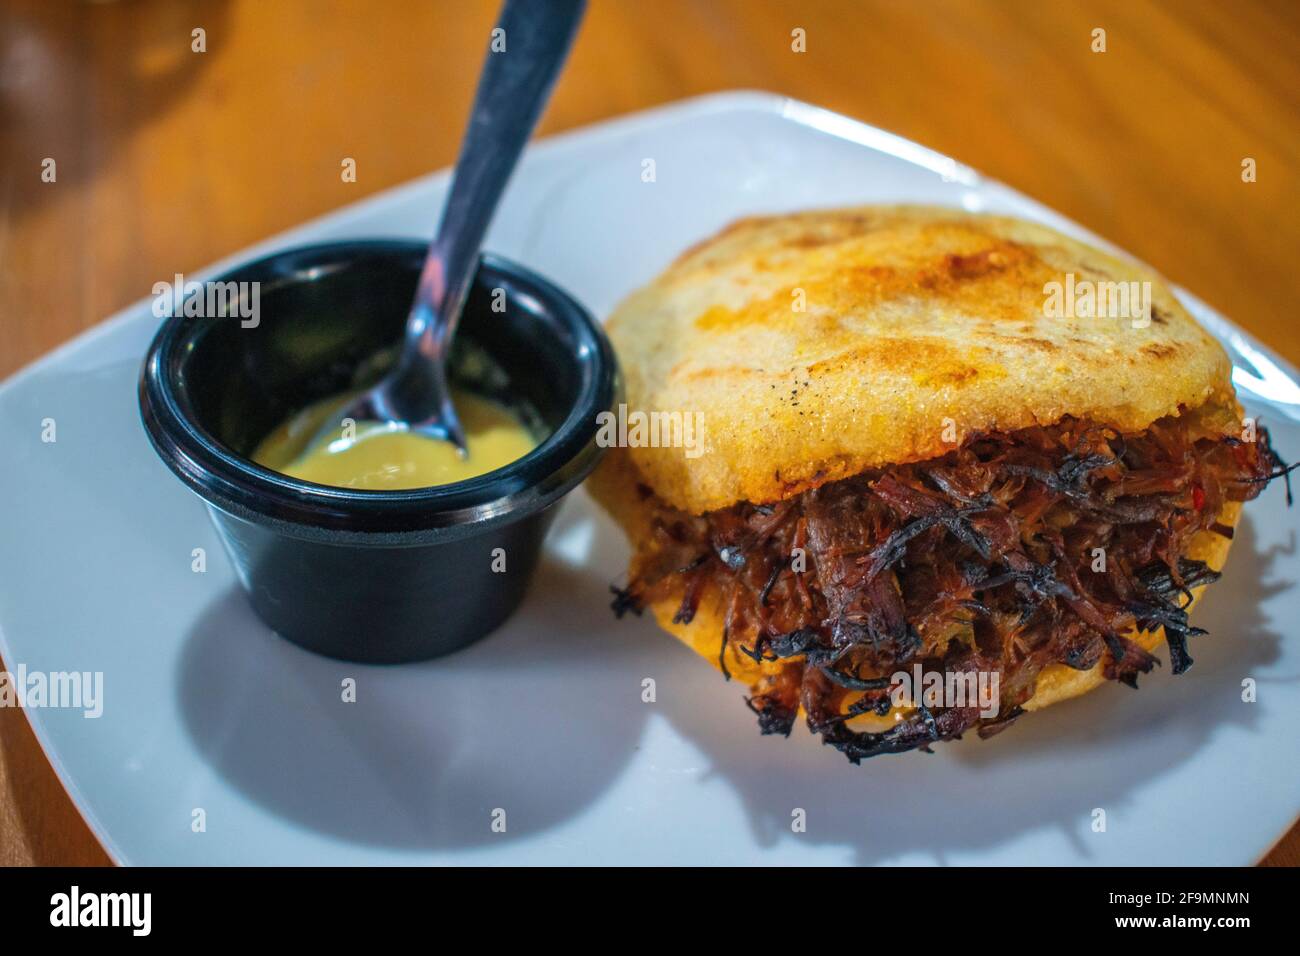 Venezuelan Arepas In Budare On Tablecloth Stock Photo - Download